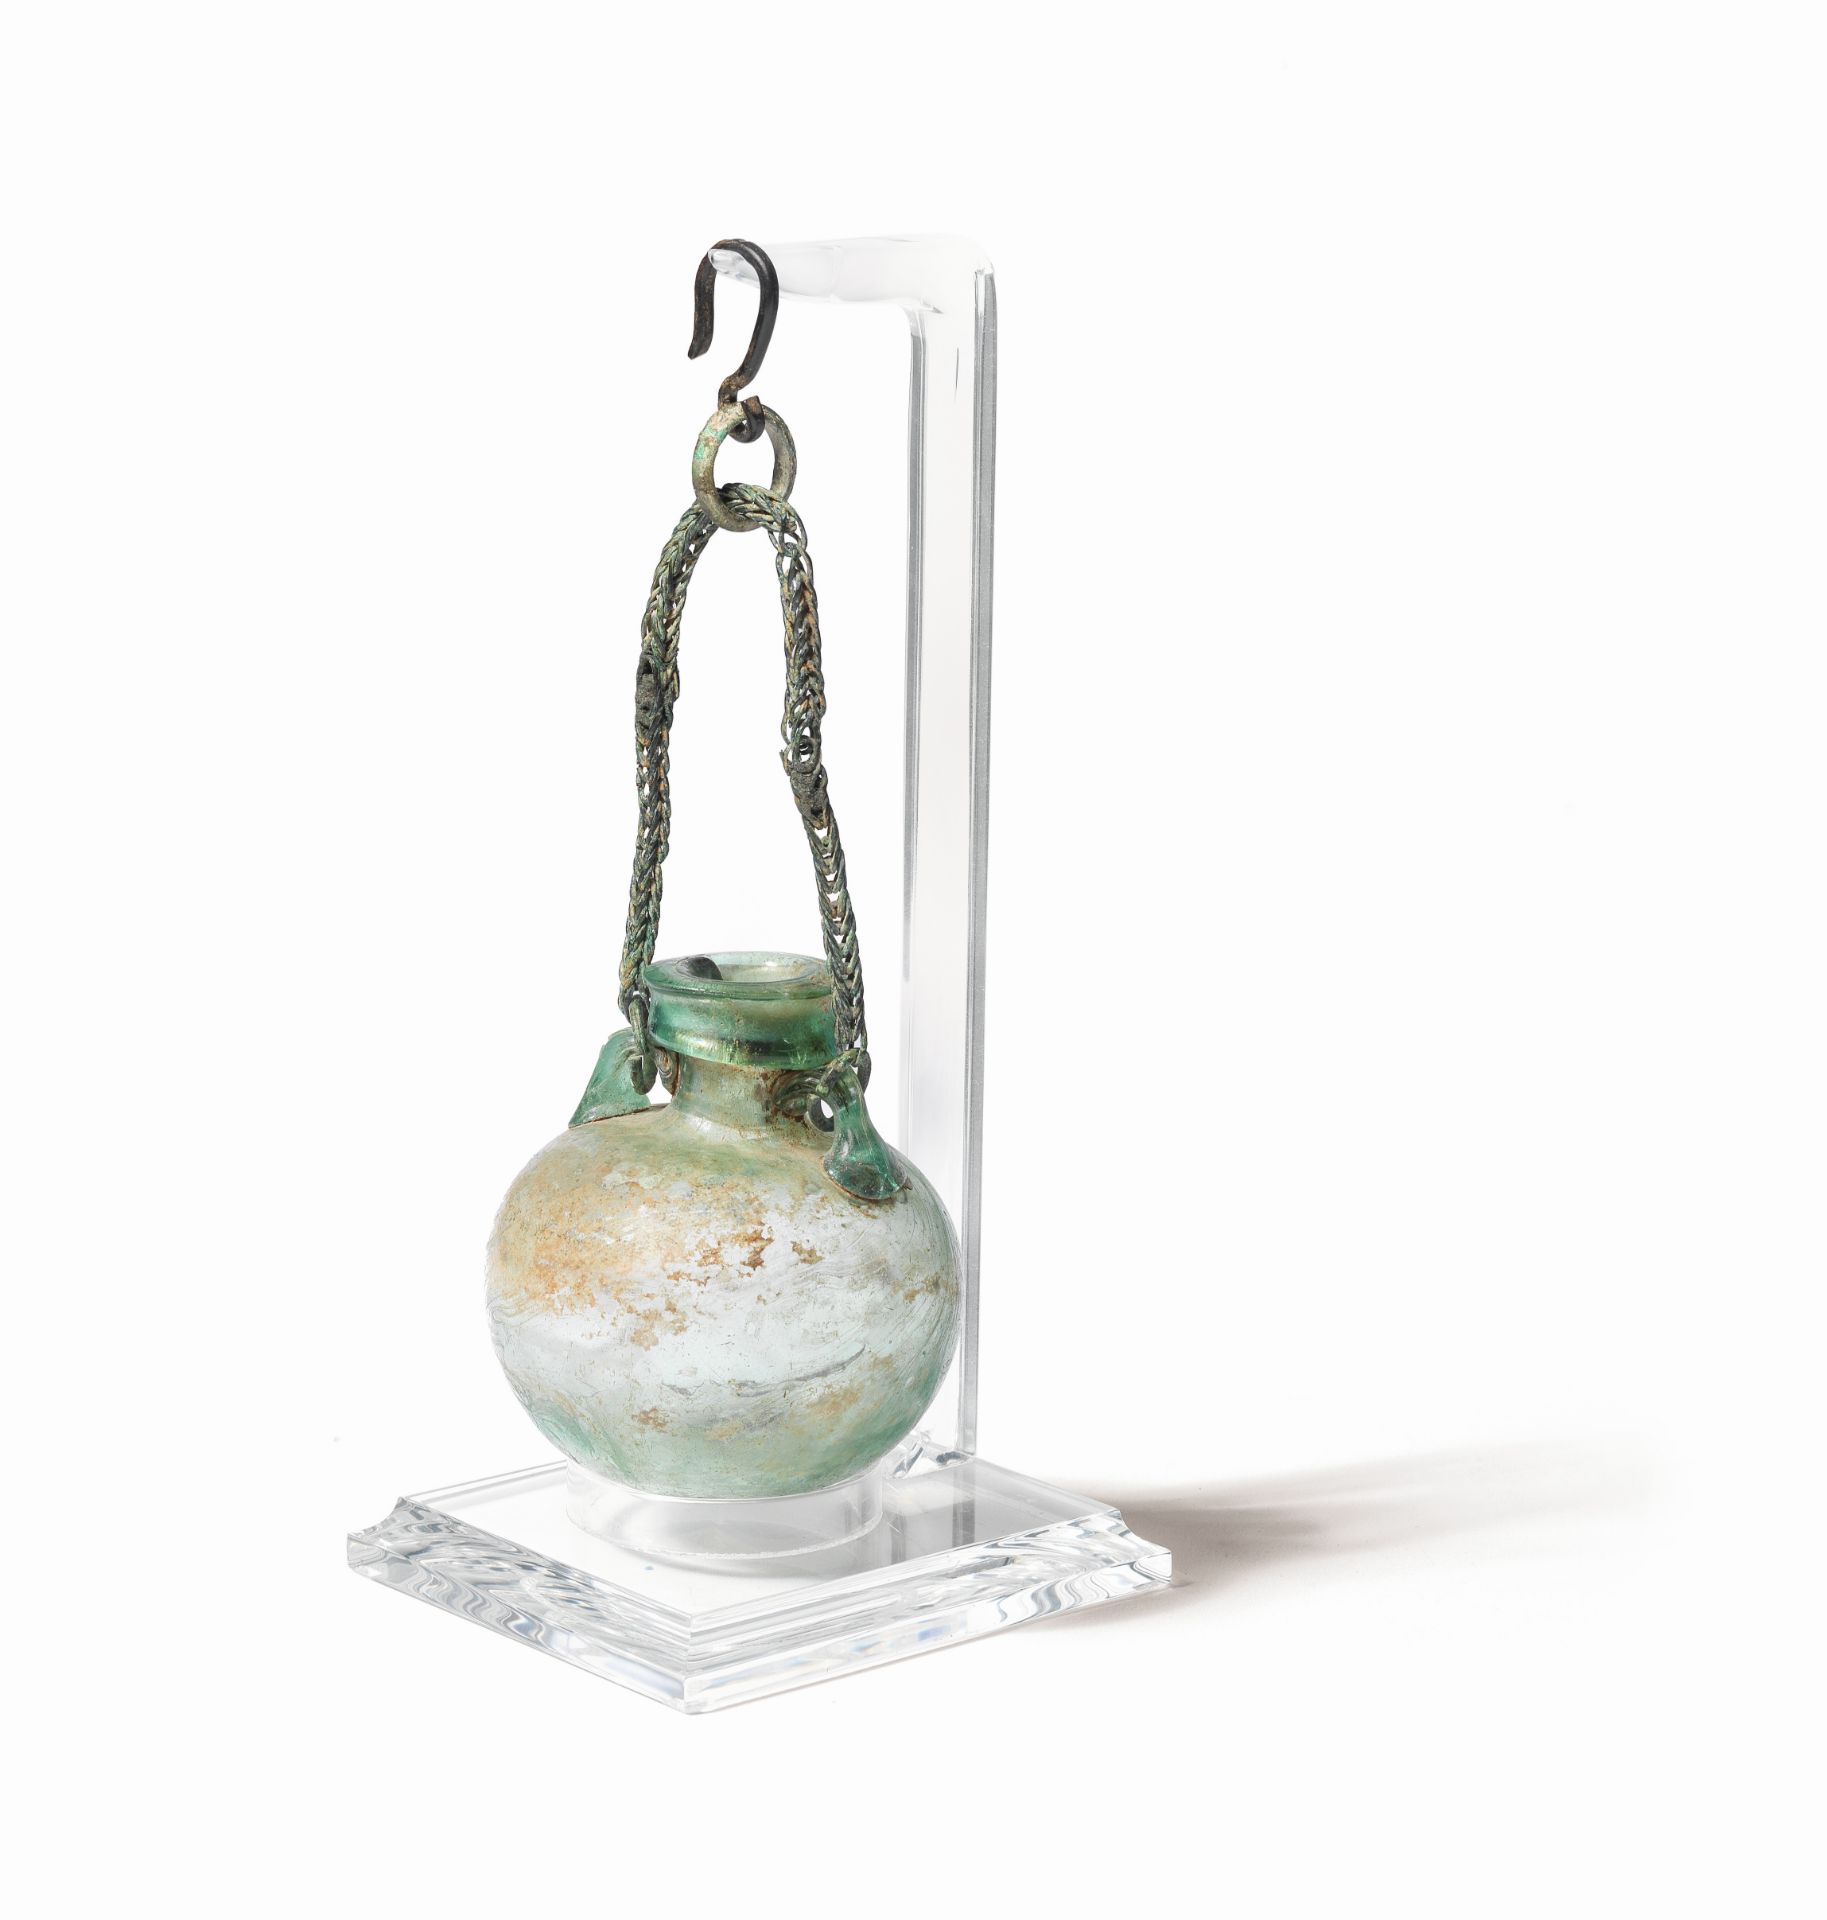 A Roman green glass aryballos with bronze link chain